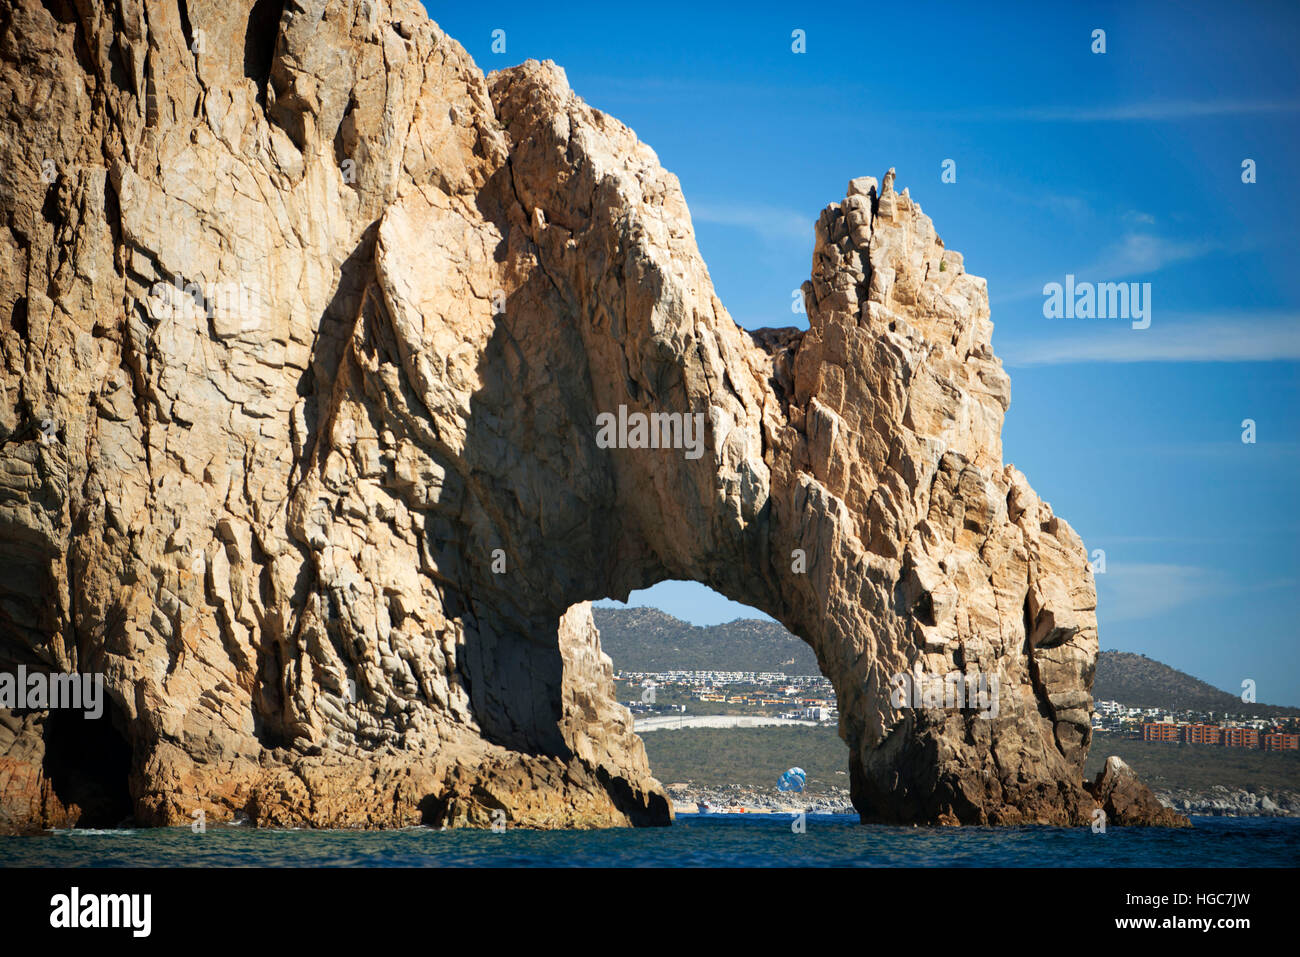 El Arco (The Arch), Land's End and Lover's Beach at the tip of the cape; Cabo San Lucas, Baja California Sur, Mexico. Stock Photo